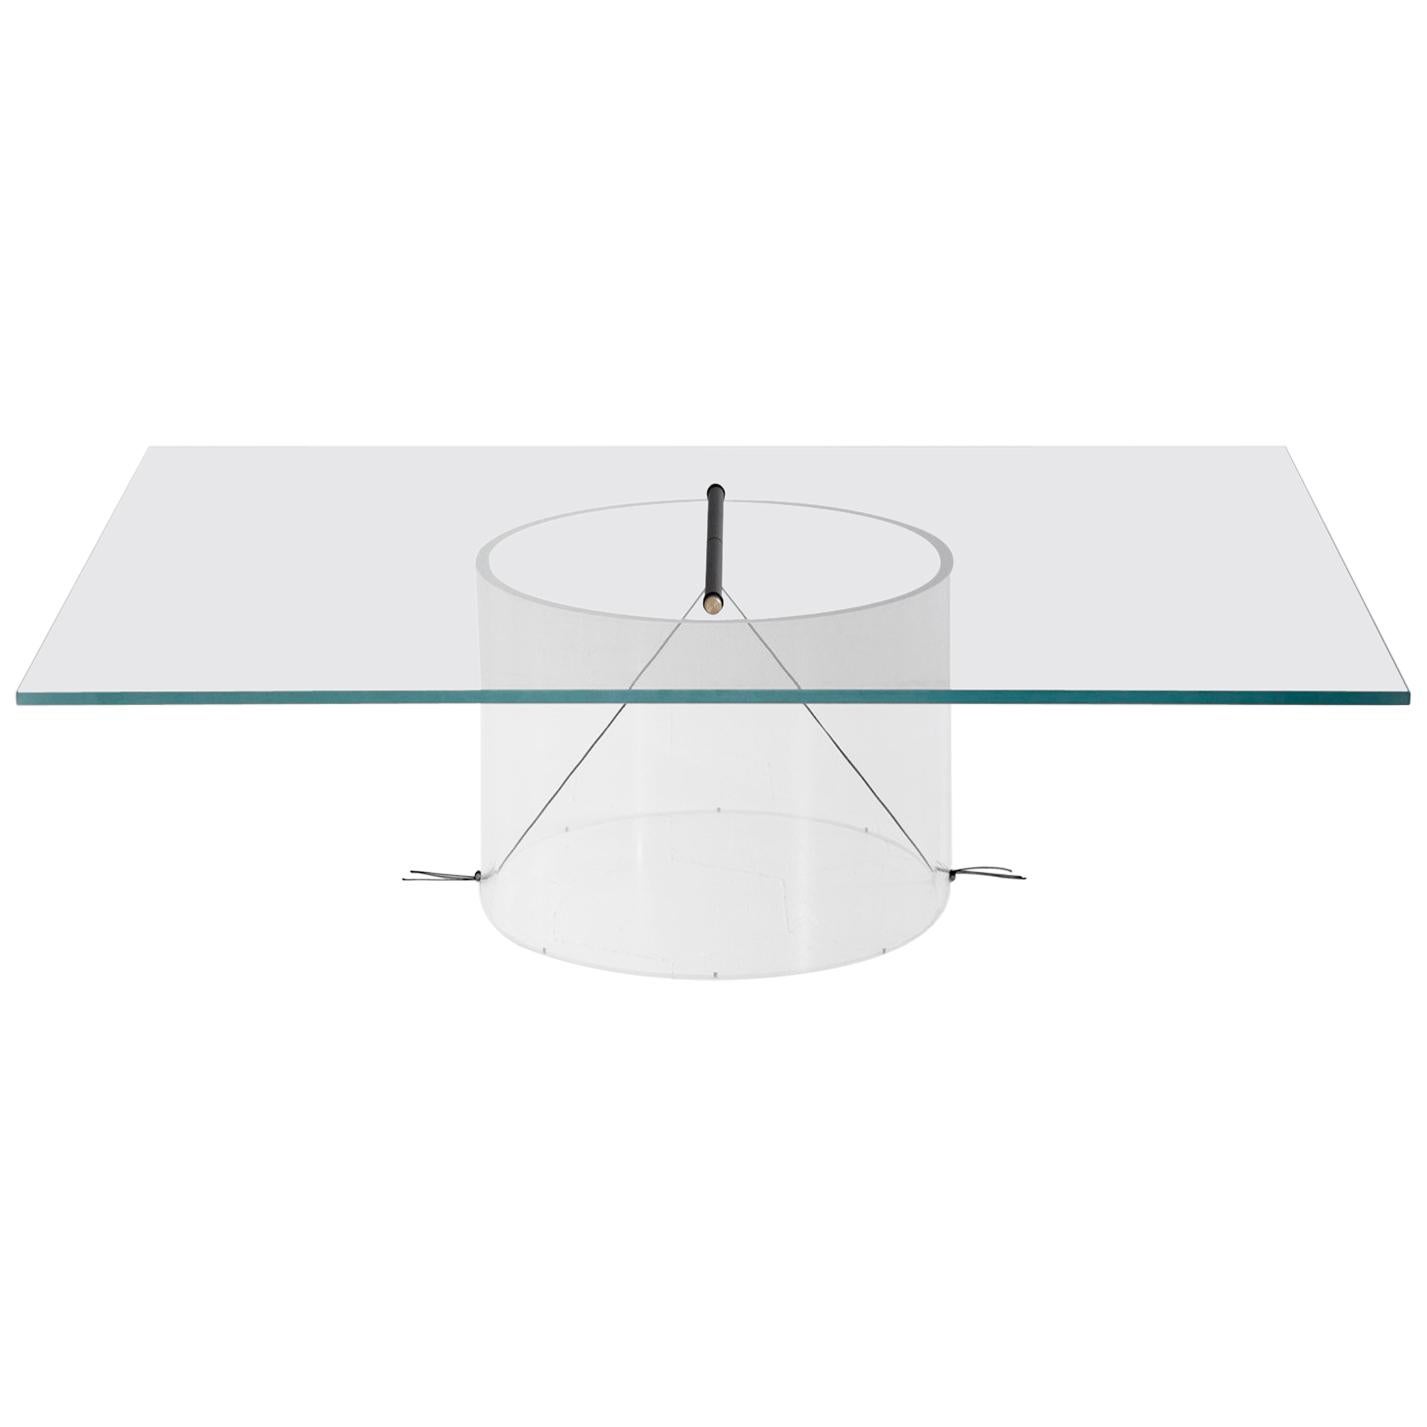 Equilibrium Low Table with Glass Top by Guglielmo Poletti